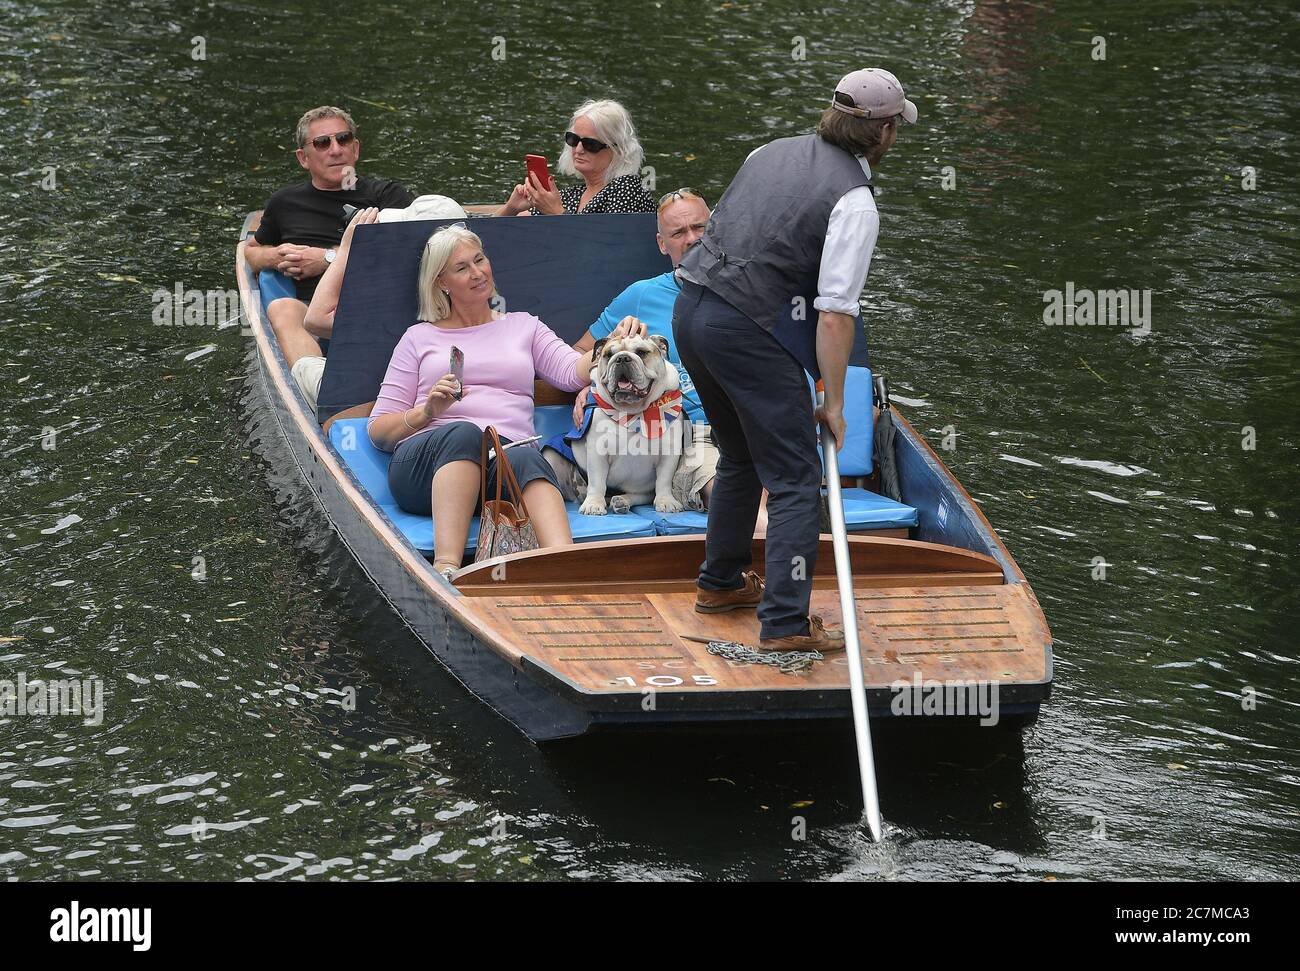 Cambridge, UK. 18th July, 2020. Visitors to Cambridge enjoy the warm spell of weather by taking rides on Punts on the River Cam. Credit: MARTIN DALTON/Alamy Live News Stock Photo